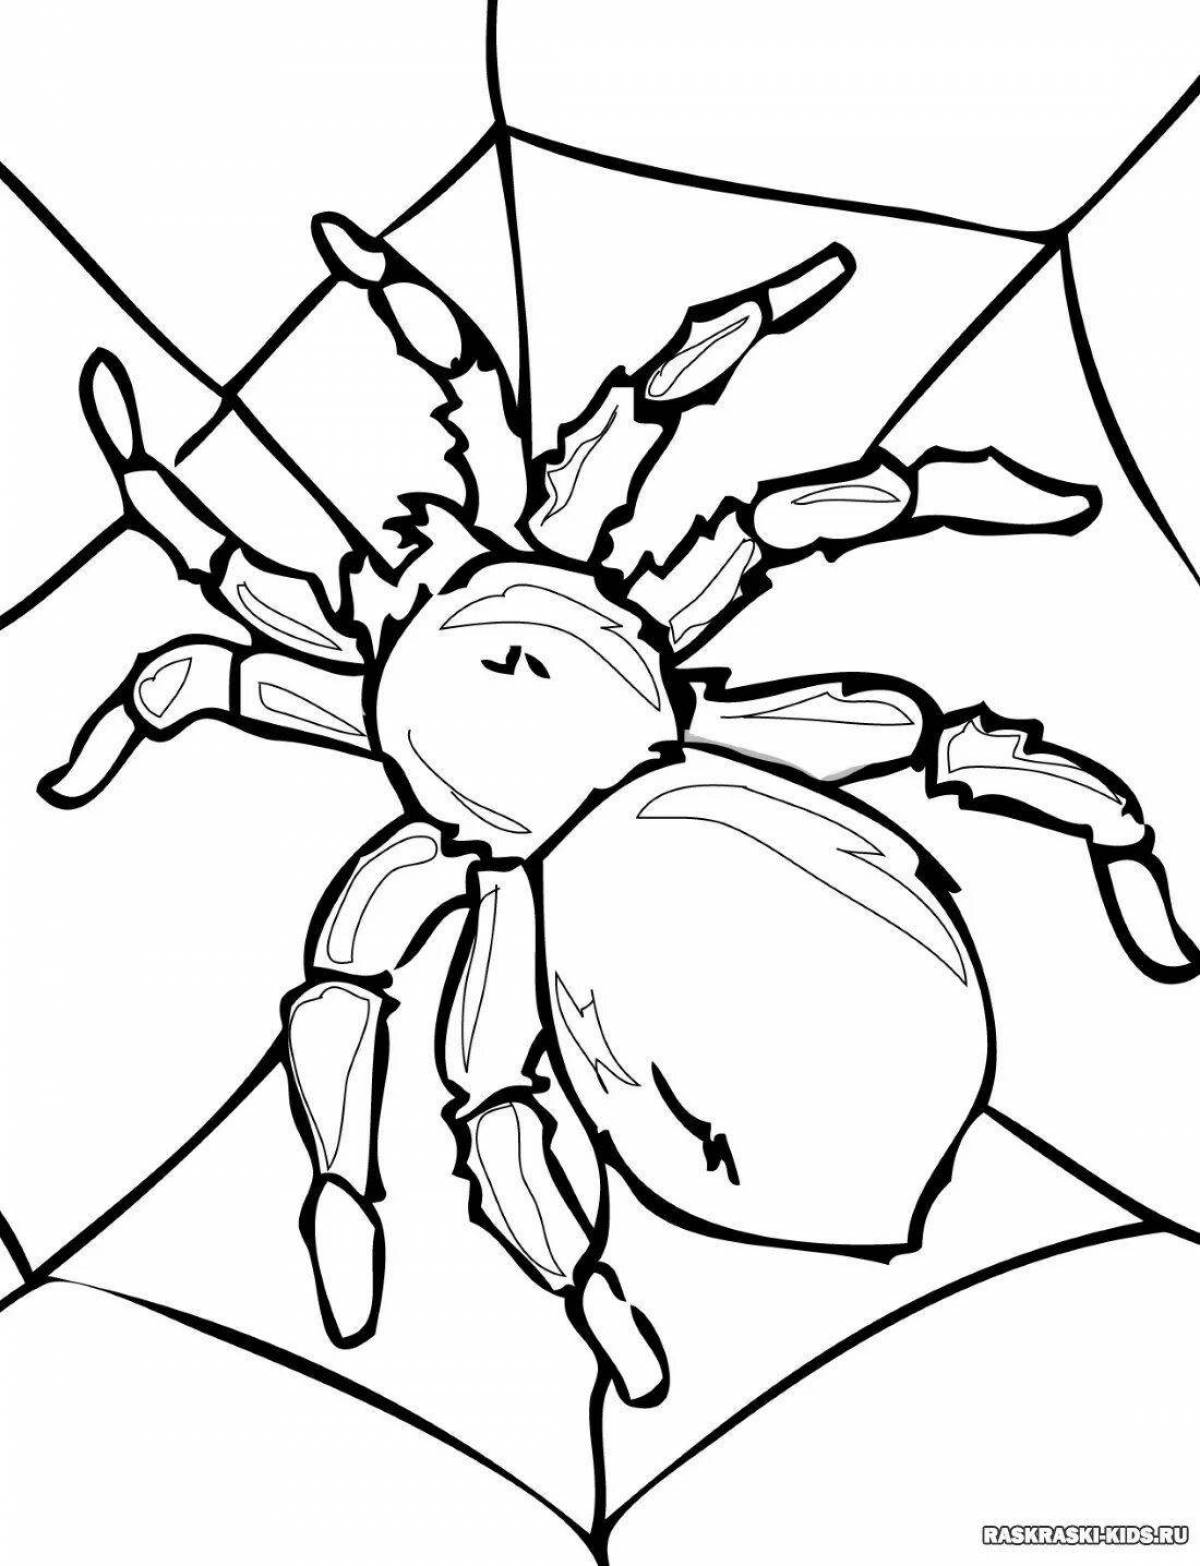 Humorous coloring page error